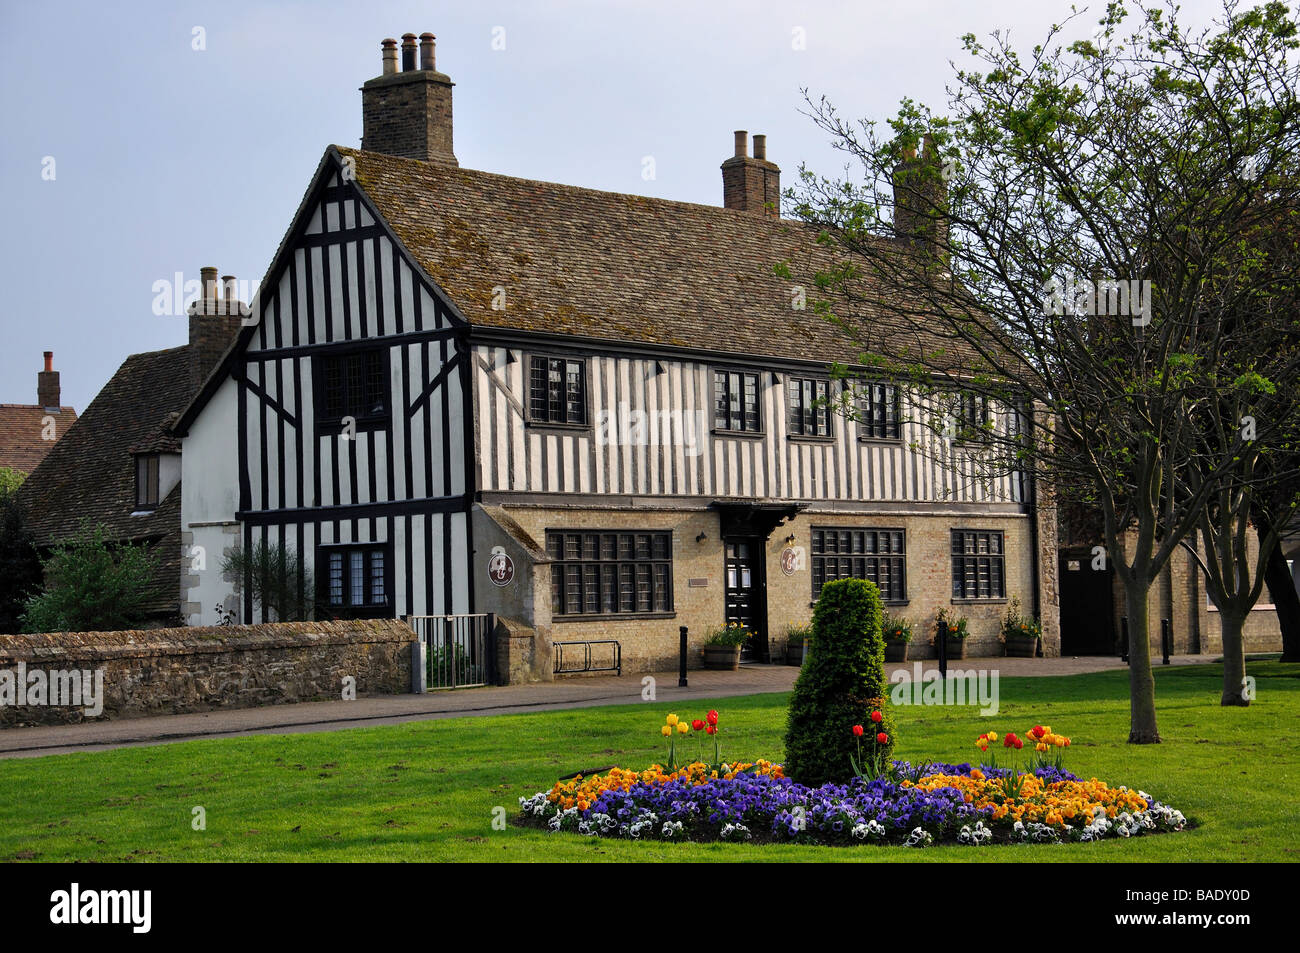 Maison d'Oliver Cromwell Museum, St Mary's Green, Ely, Cambridgeshire, Angleterre, Royaume-Uni Banque D'Images